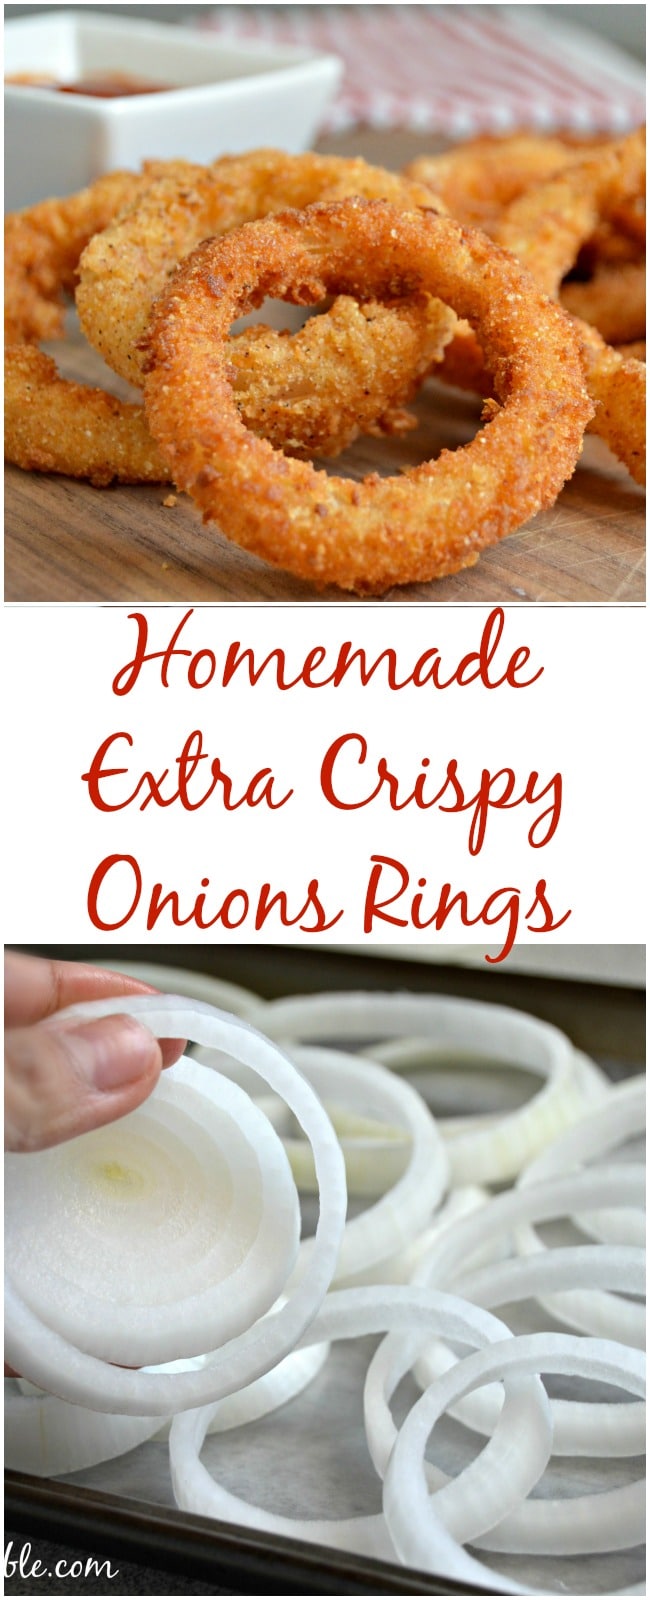 How To Make Perfect, Extra Crispy Homemade Onion Rings